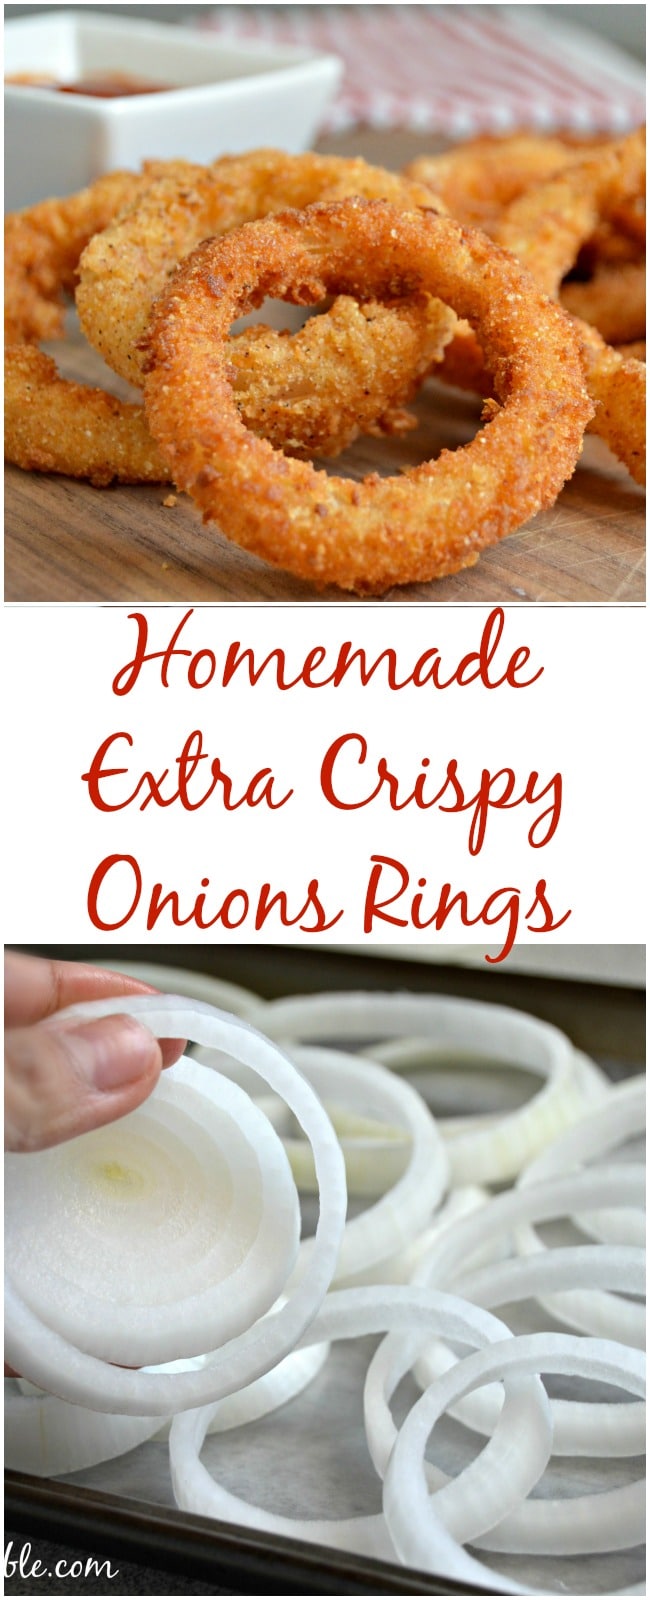 How To Make Perfect, Extra Crispy Homemade Onion Rings